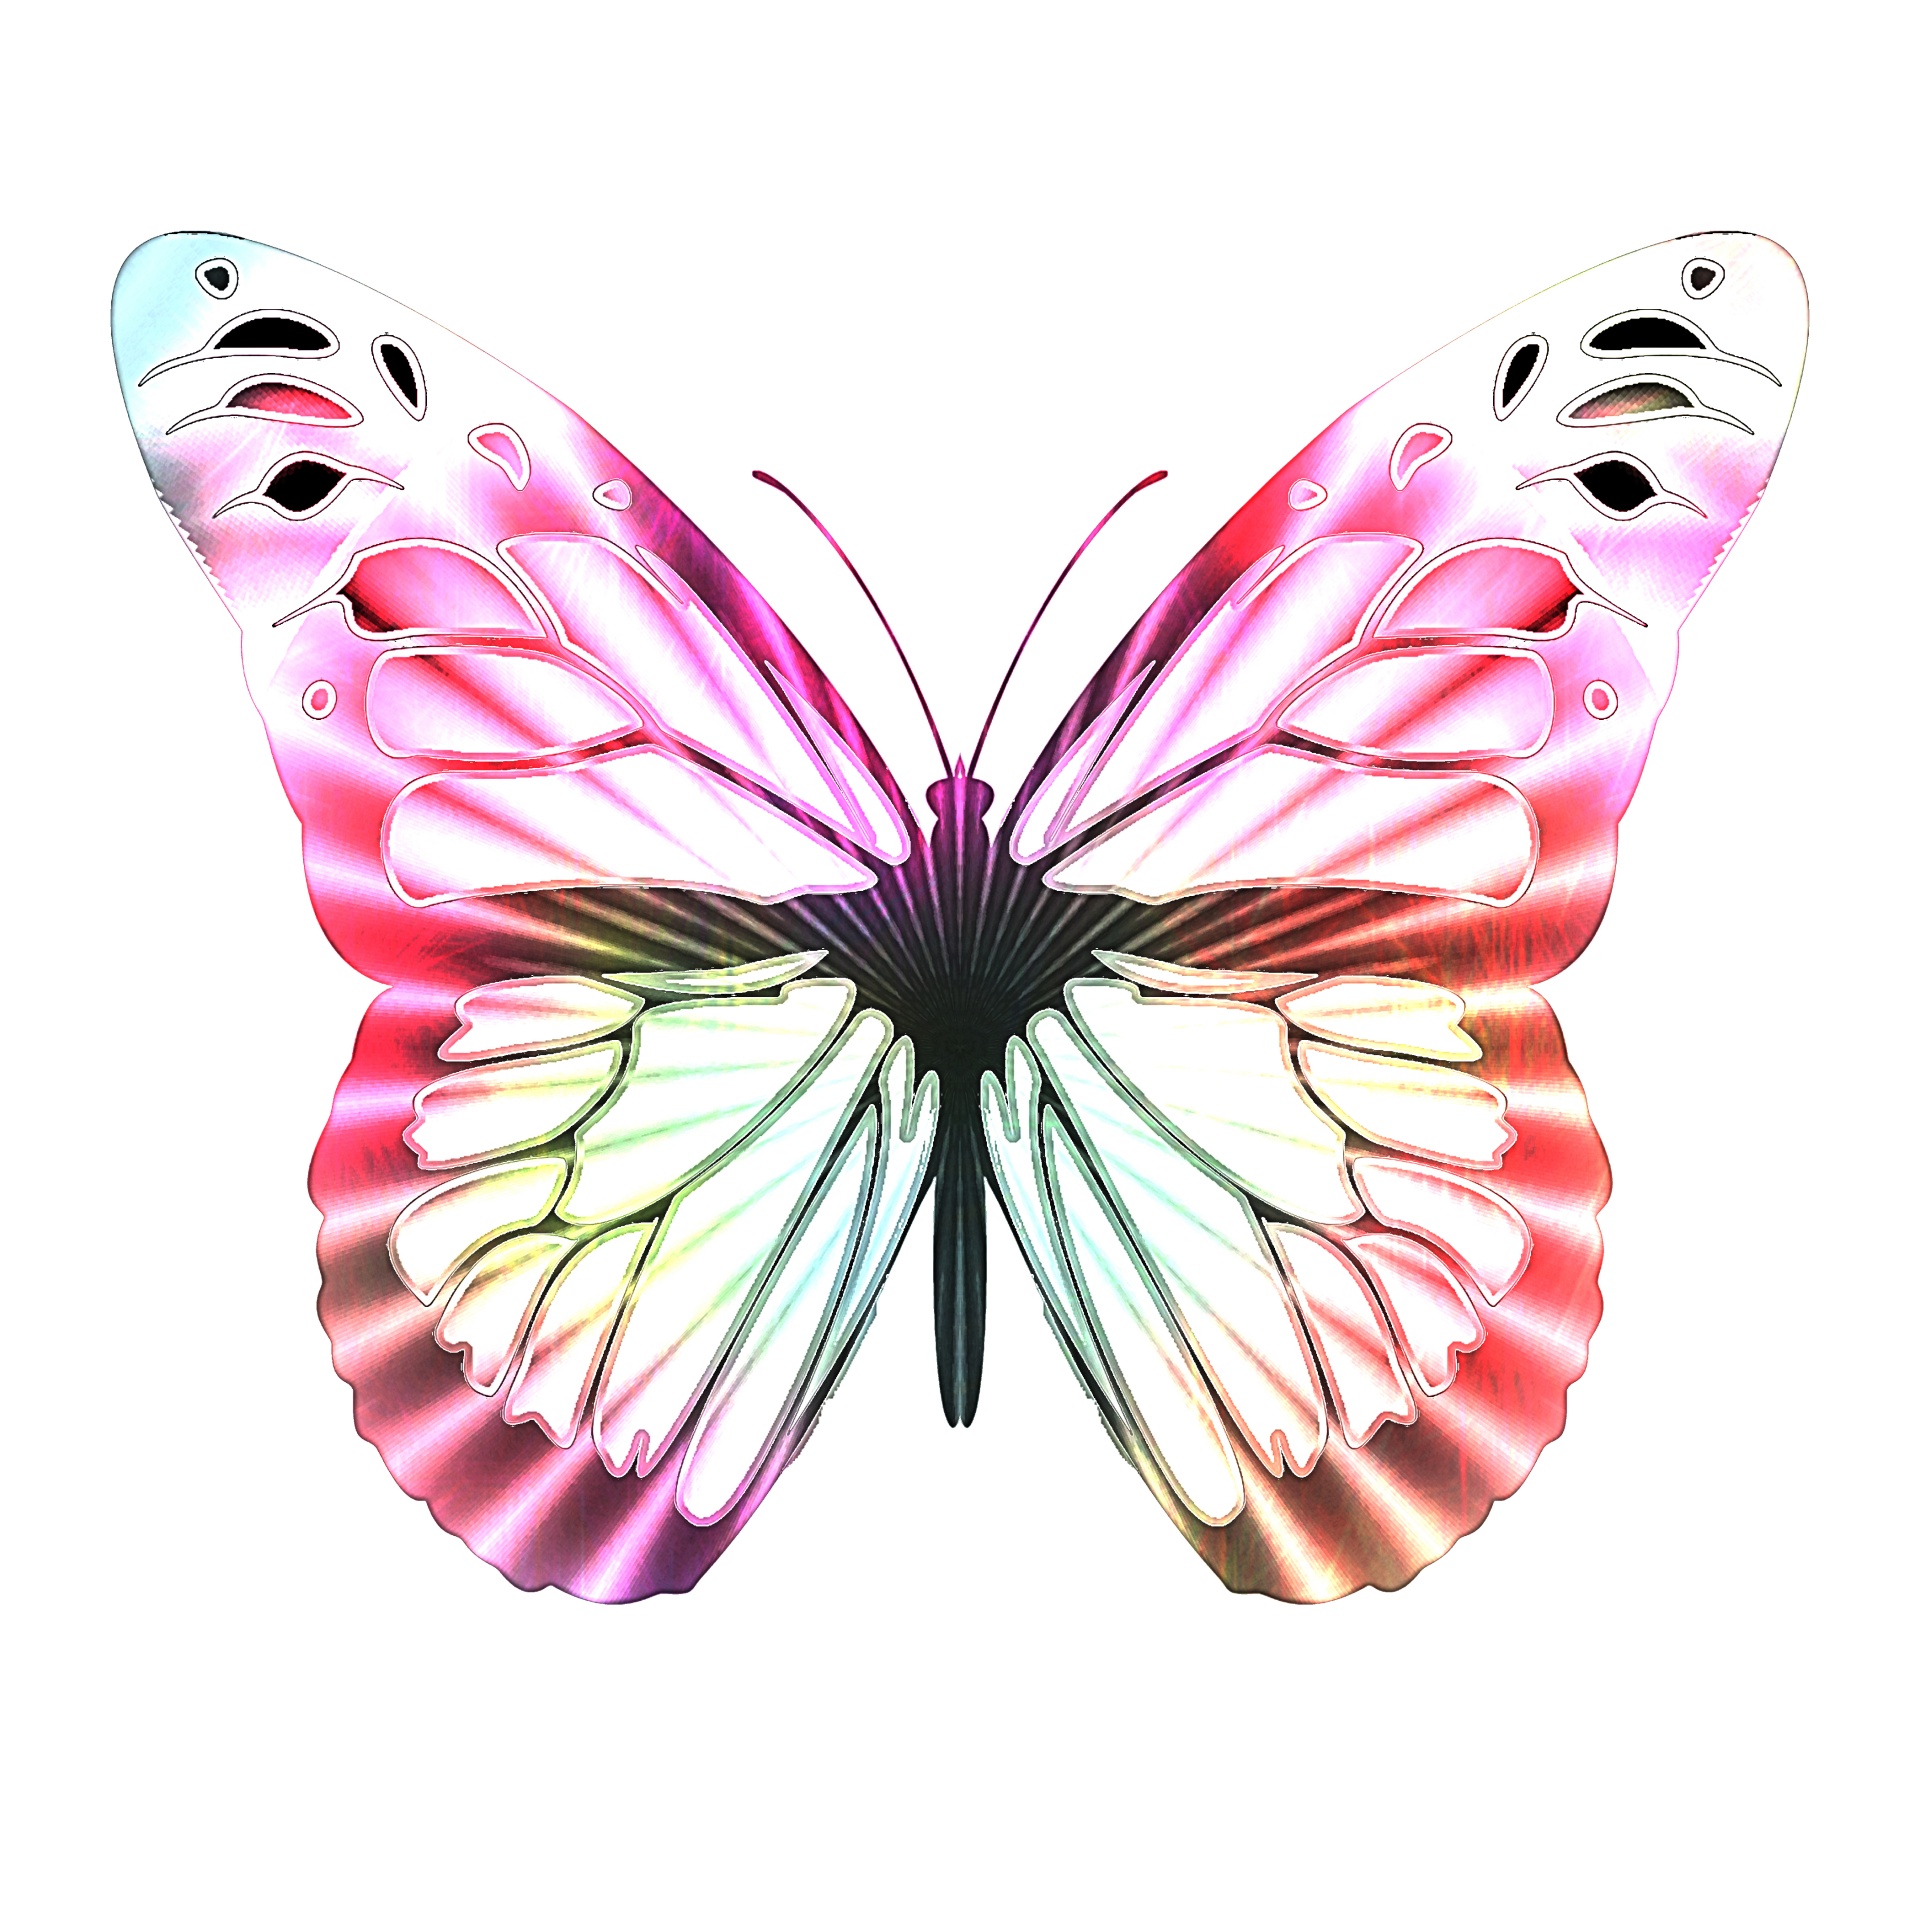 Pale pastel green and orange delicate butterfly illustration.